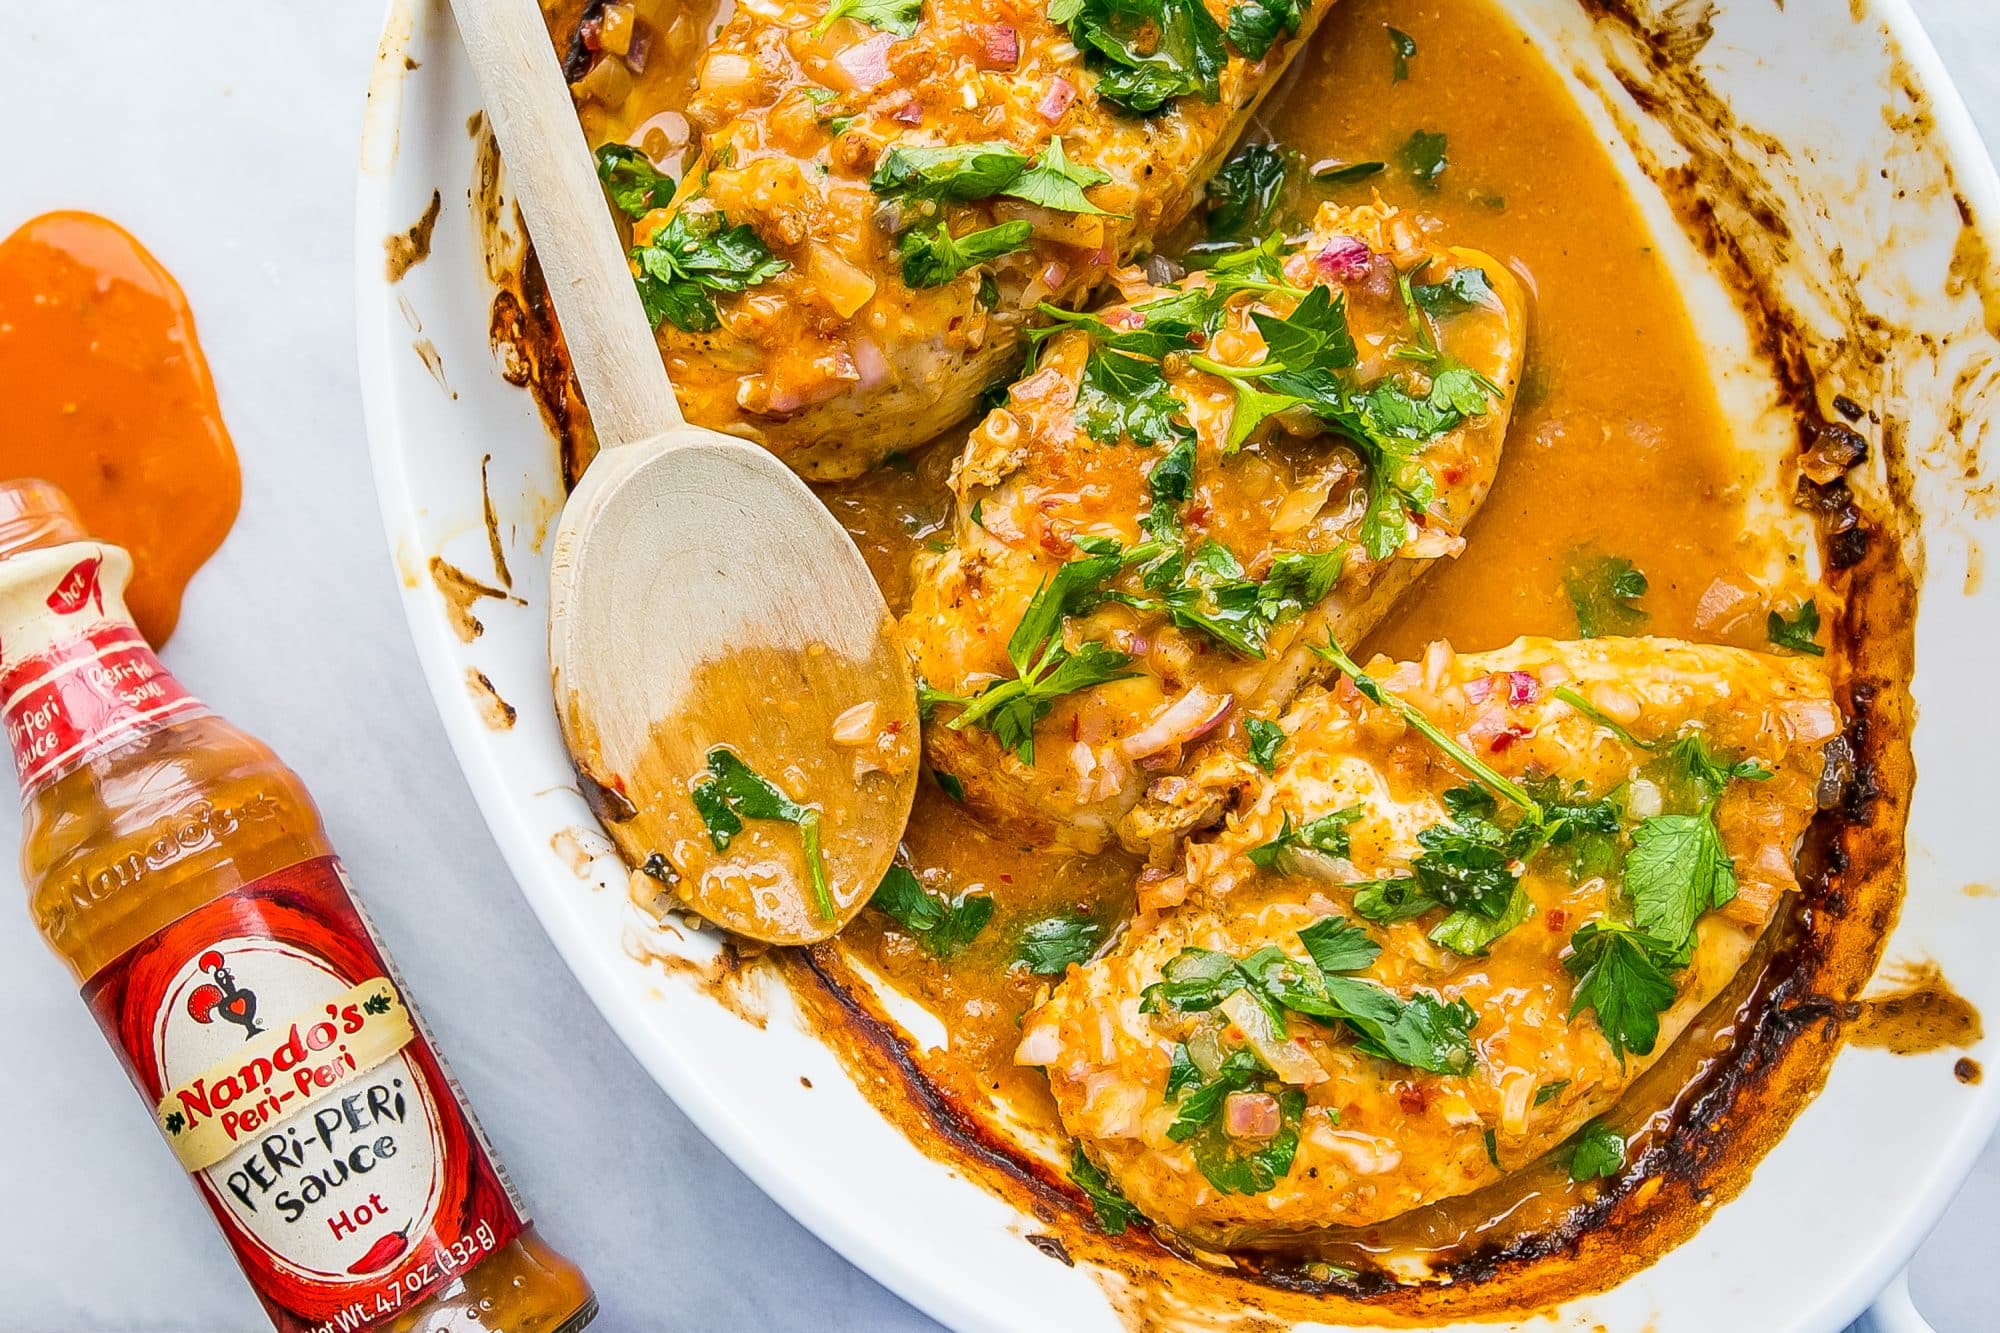 Peri Peri chicken with just 3 ingredients- this is so delicious and full of flavor!